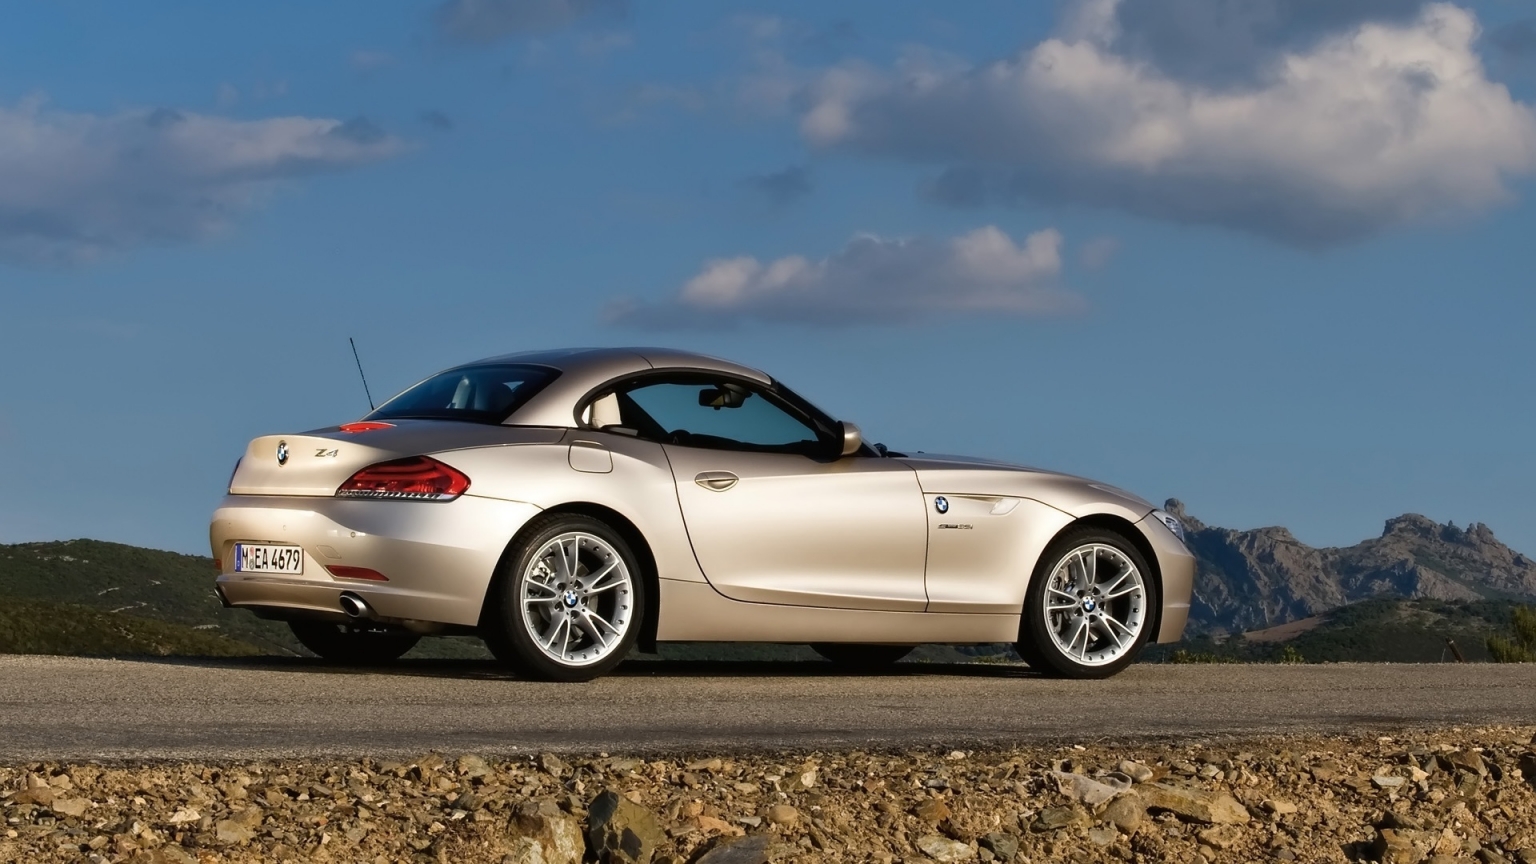 BMW Z4 Roadster Top Up 2009 for 1536 x 864 HDTV resolution